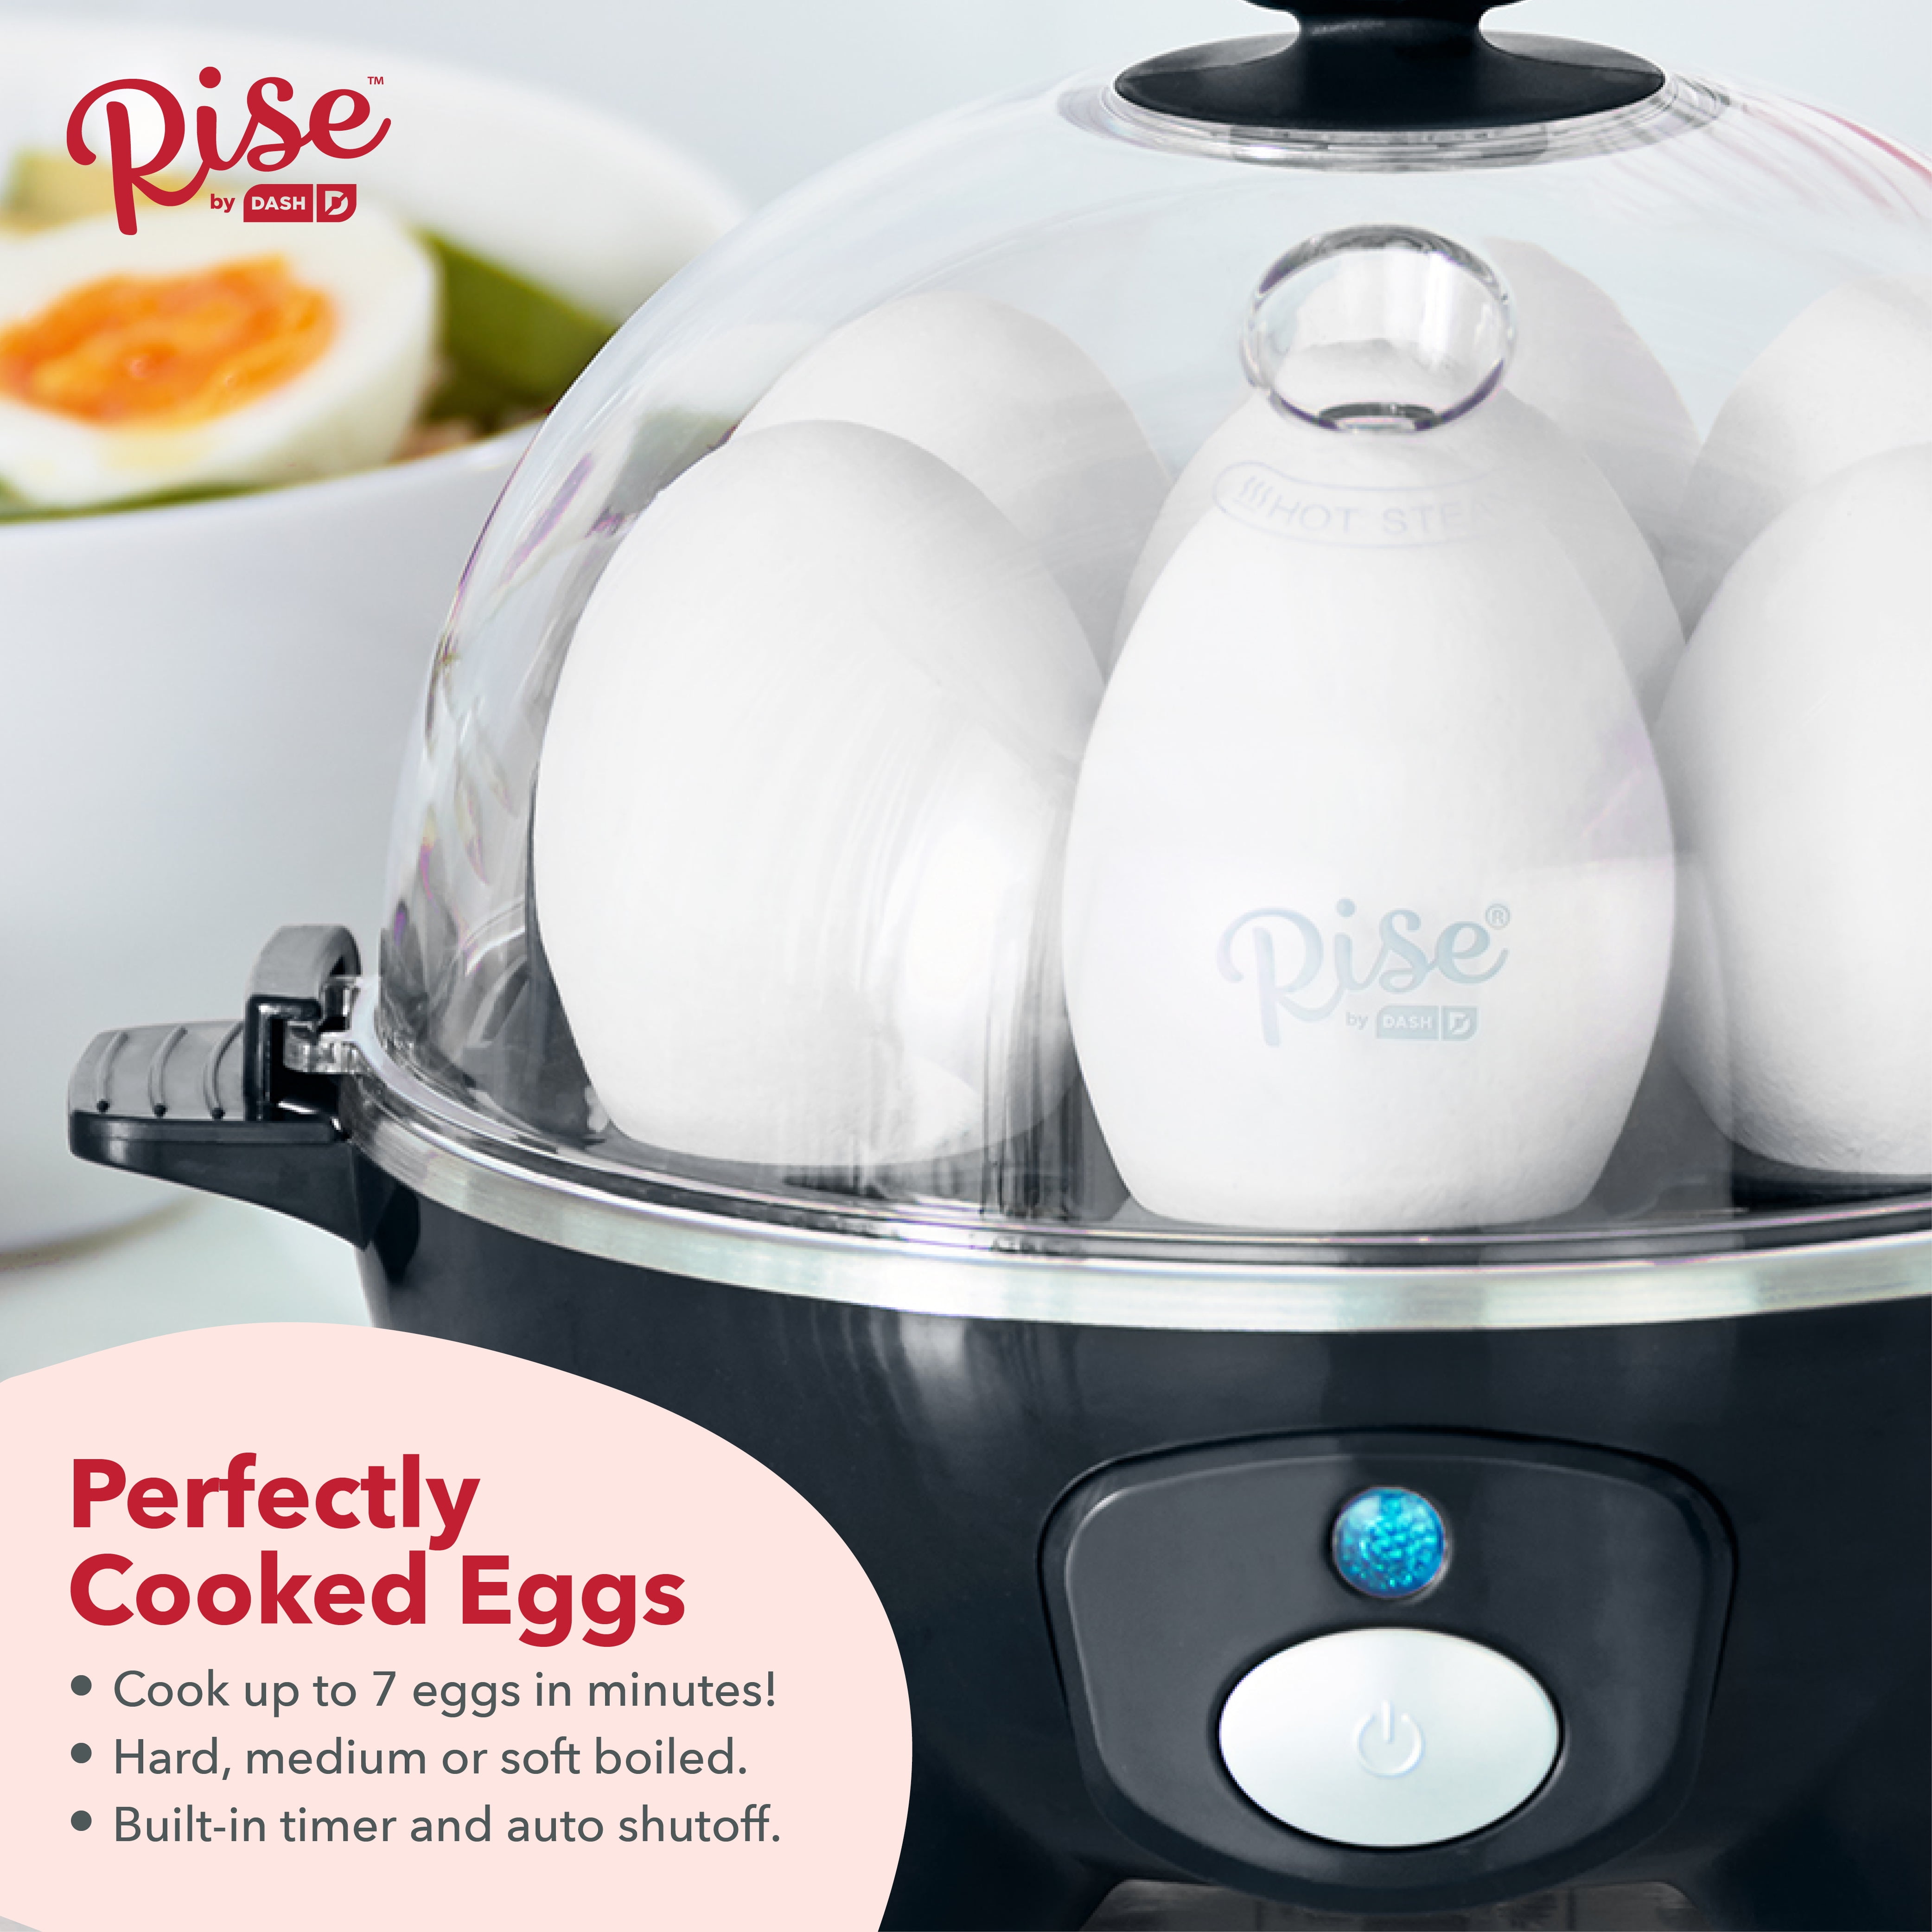 Prime Day 2021: Get the Dash egg cooker for less than $20